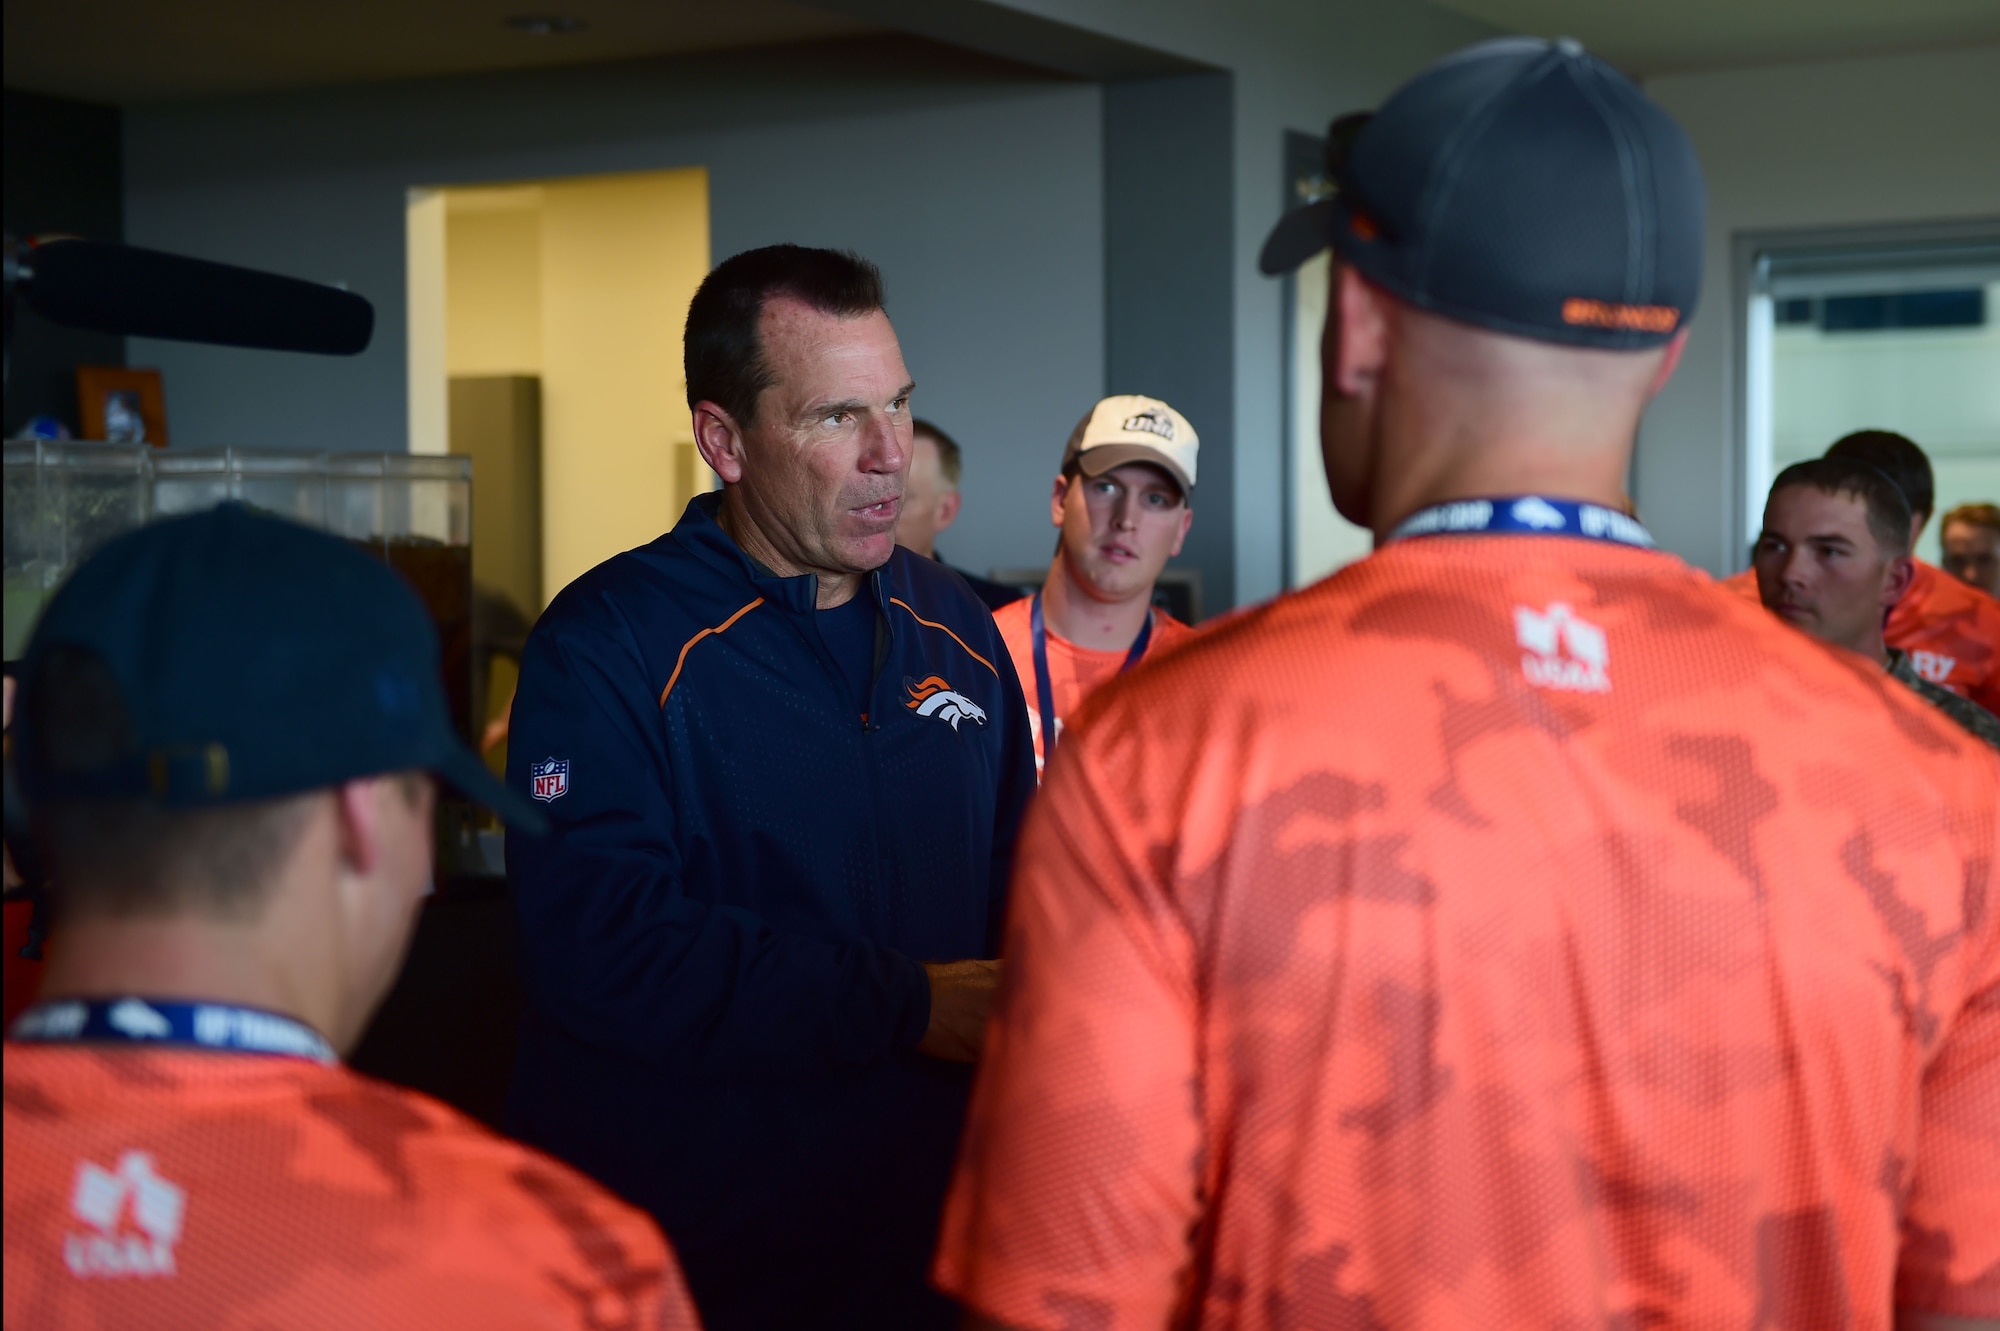 Greg Kubiak, Denver Broncos head coach, meets with military members after the Broncos morning practice to give his thanks and appreciation for their sacrifices Aug. 7, 2015, at Denver Broncos Headquarters Facility at Dove Valley in Denver. The combine consisted of drills similar to the ones prospective National Football League players are expected to complete during the NFL combine held in Indianapolis before the NFL draft. All participants were also treated to a viewing of the Broncos’ Friday morning practice and a visit from Broncos players, as well as the head coach. (U.S. Air Force photo by Airman 1st Class Luke W. Nowakowski/Released) 